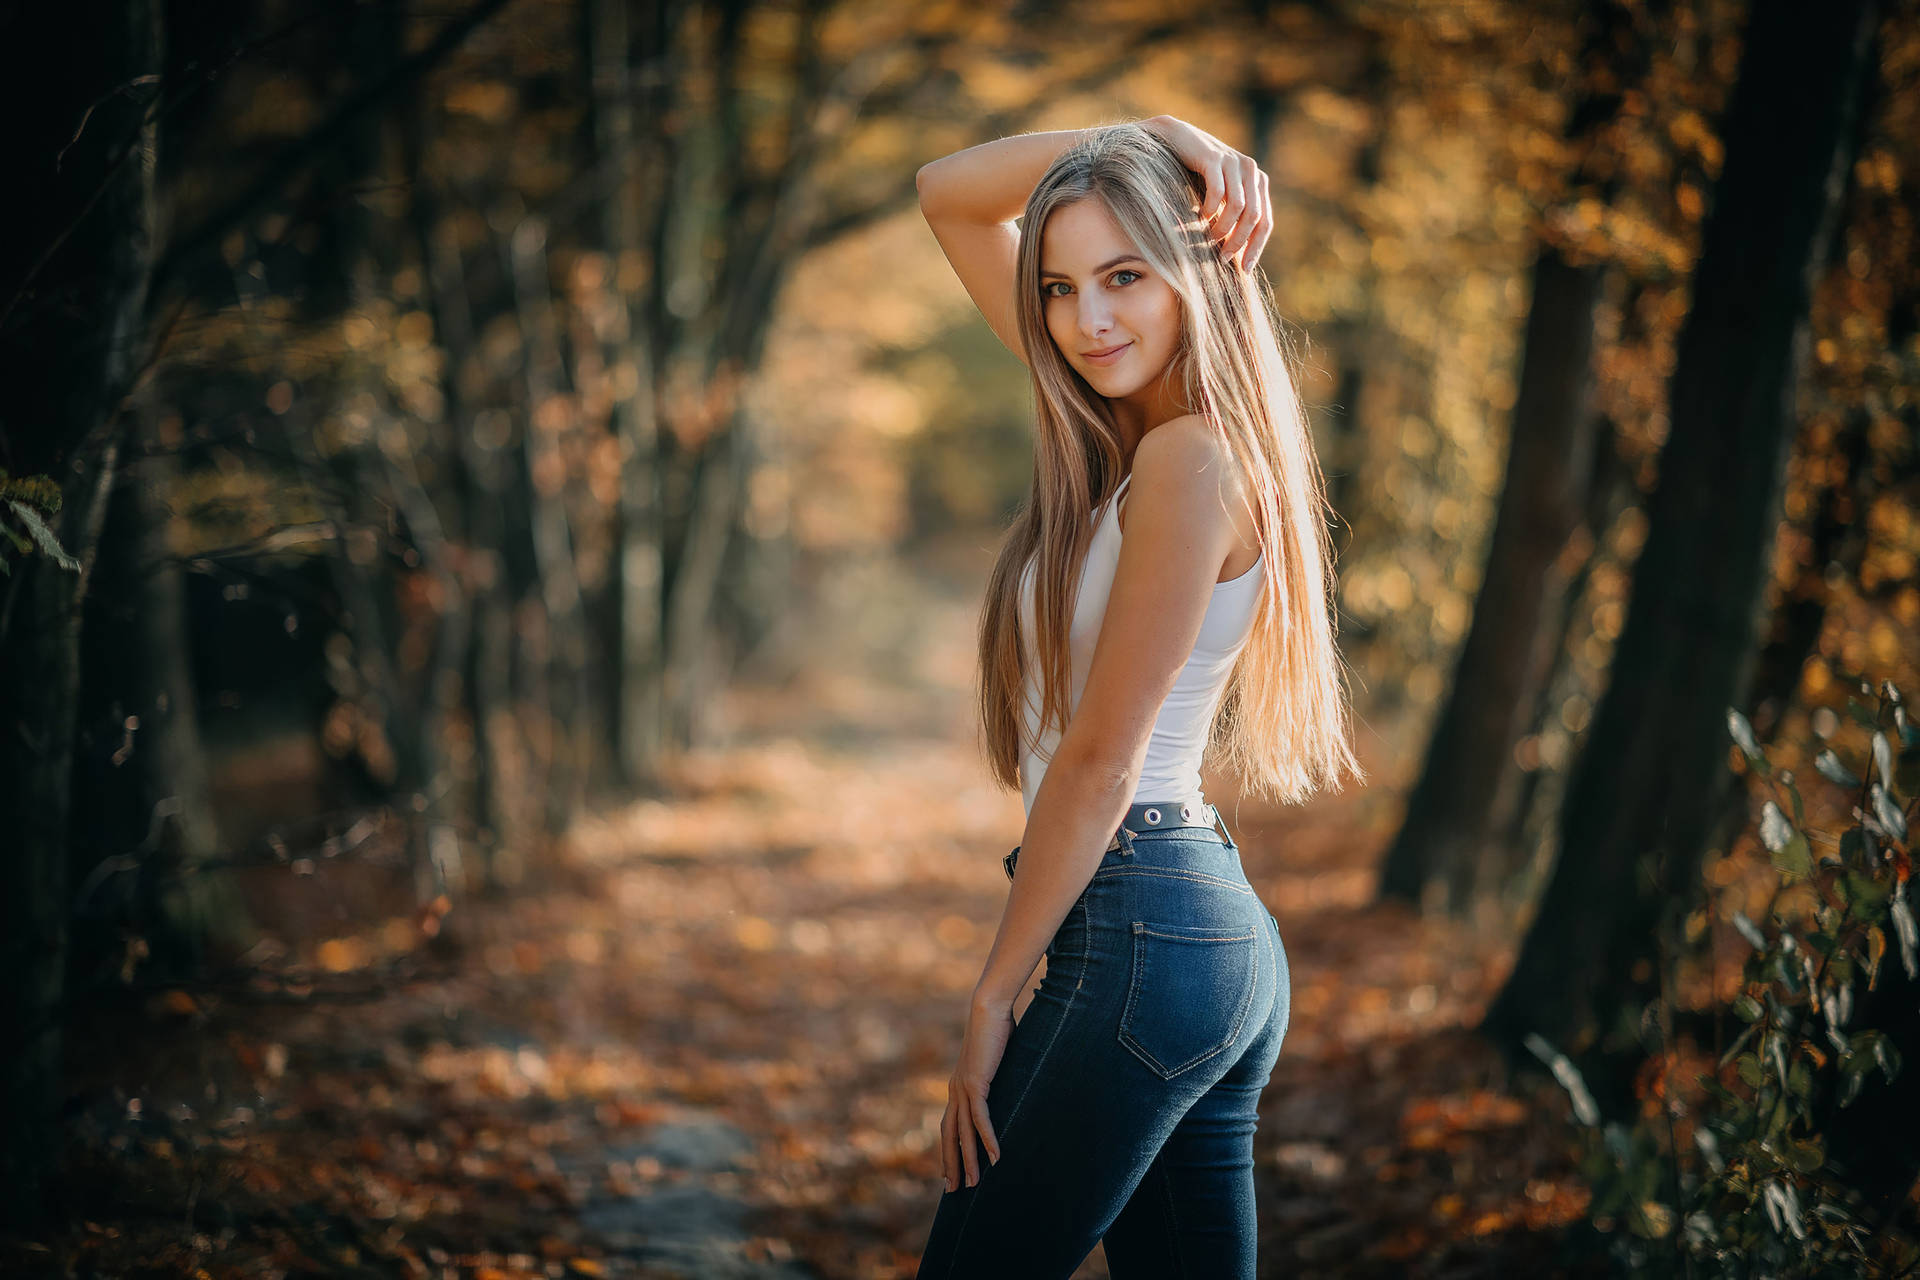 Beautiful Blondes Posing In A Forest Wallpaper